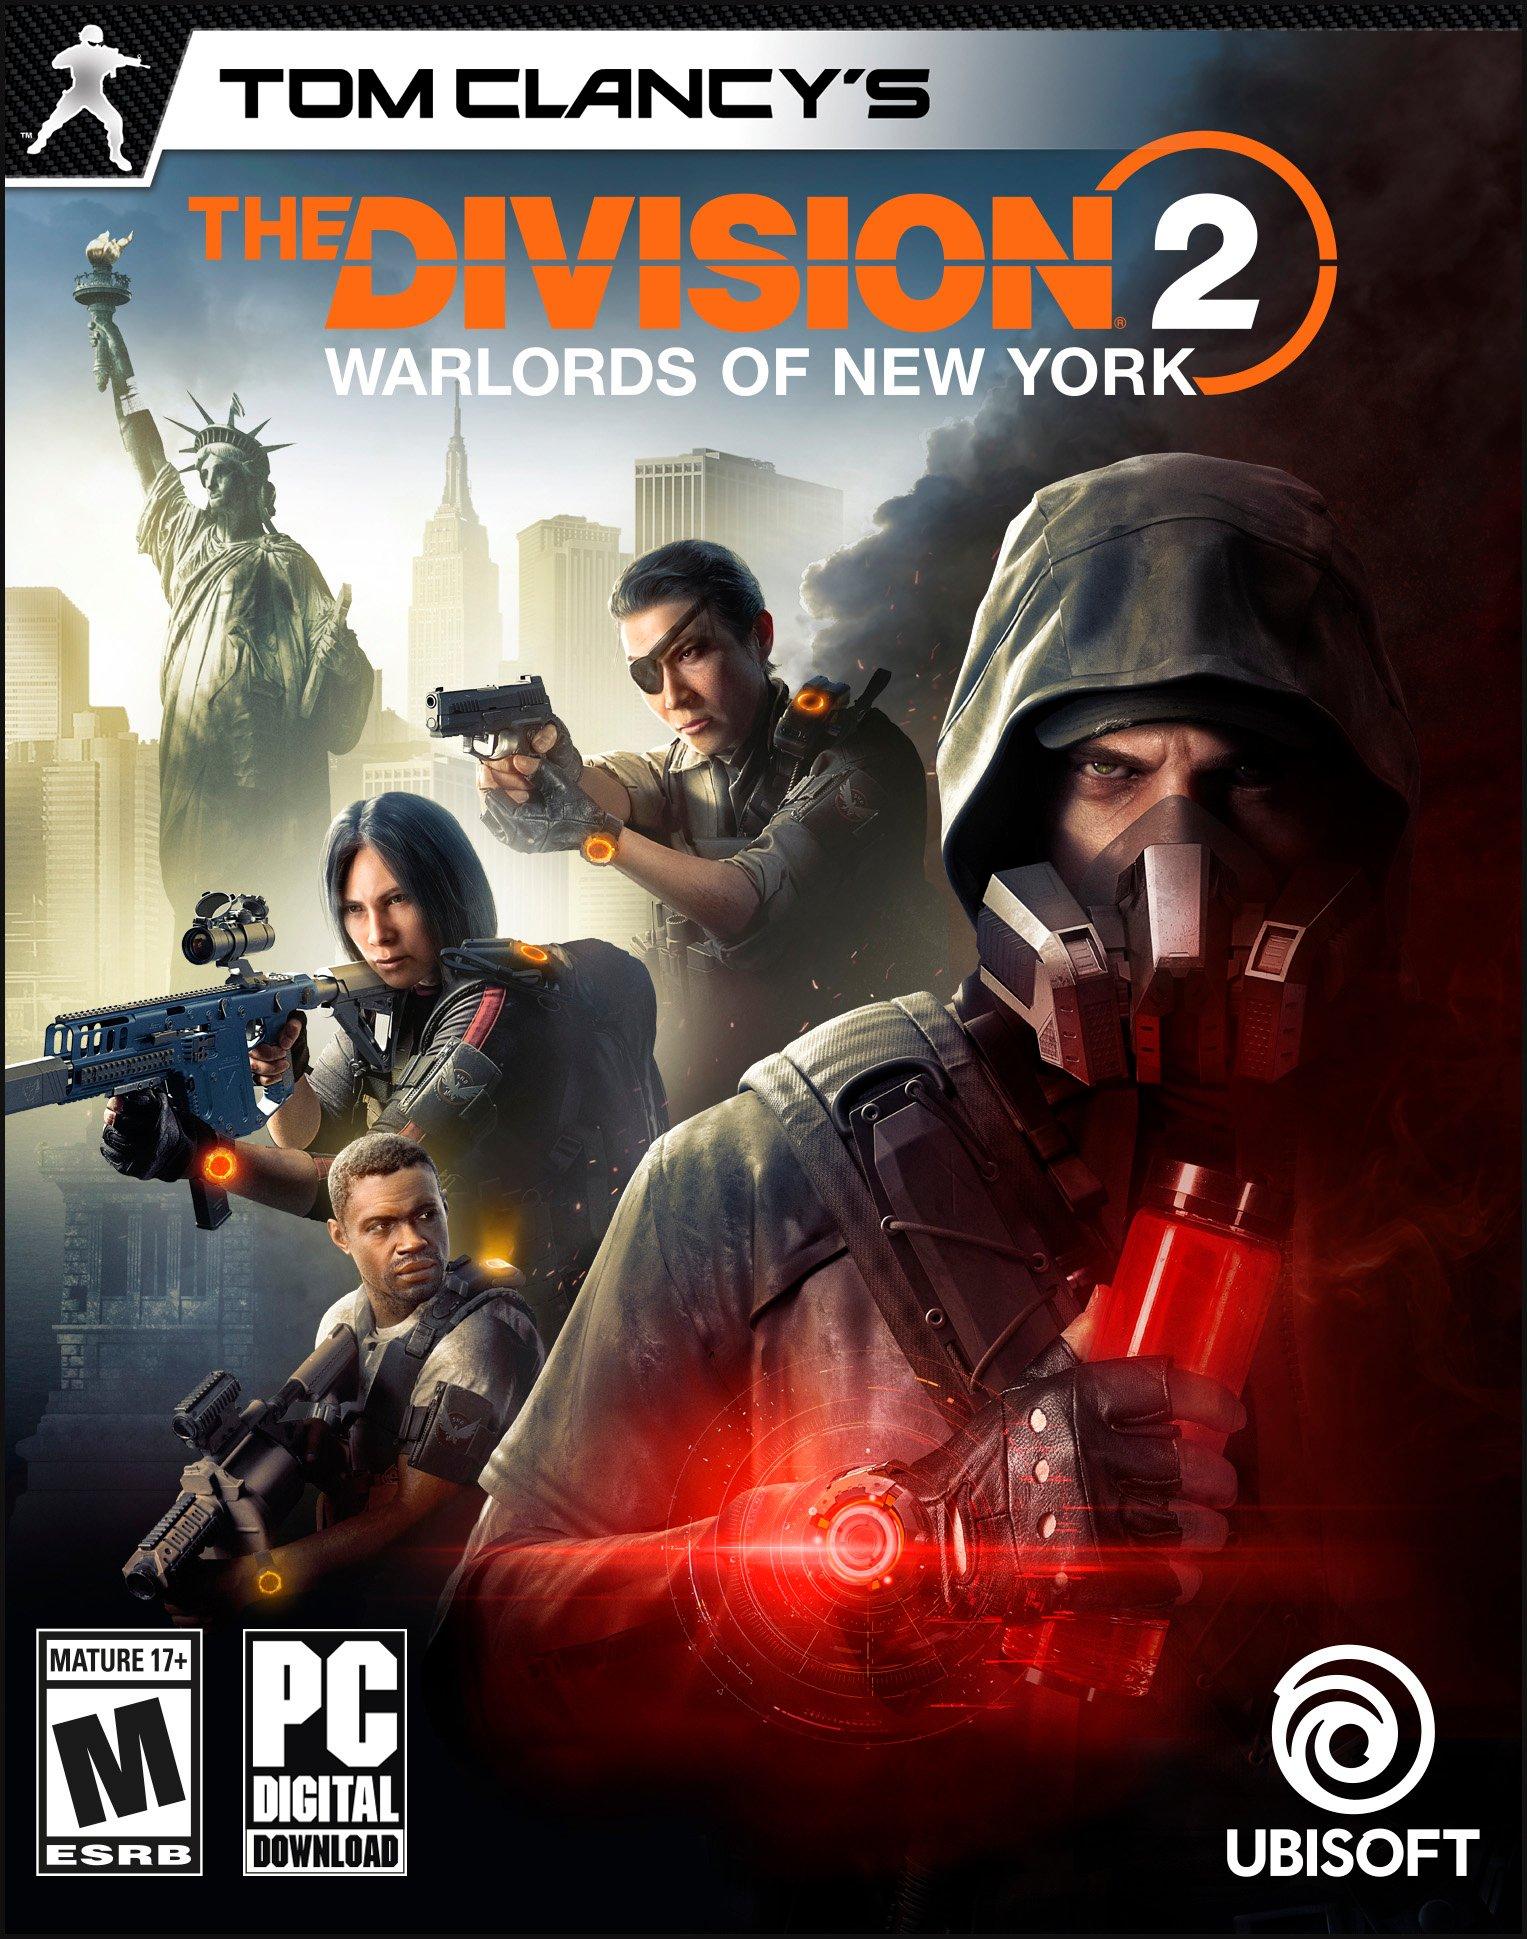 Mittens Derive saint Tom Clancy's The Division 2: Warlords of New York Bundle